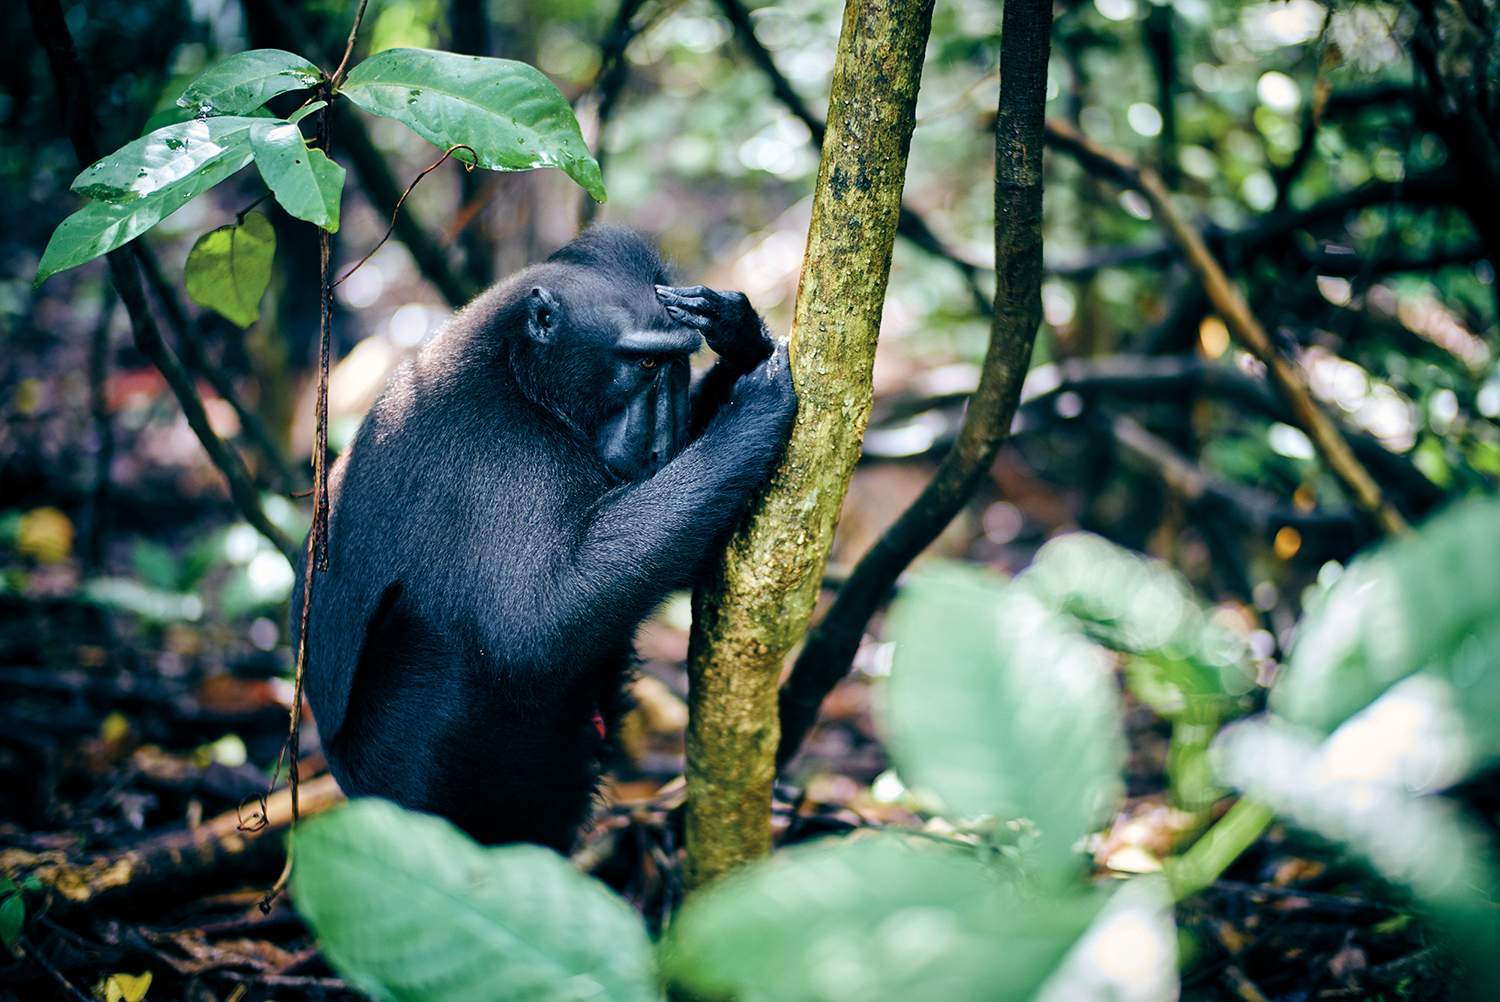 How to take great travel photos - Monkey in the jungle